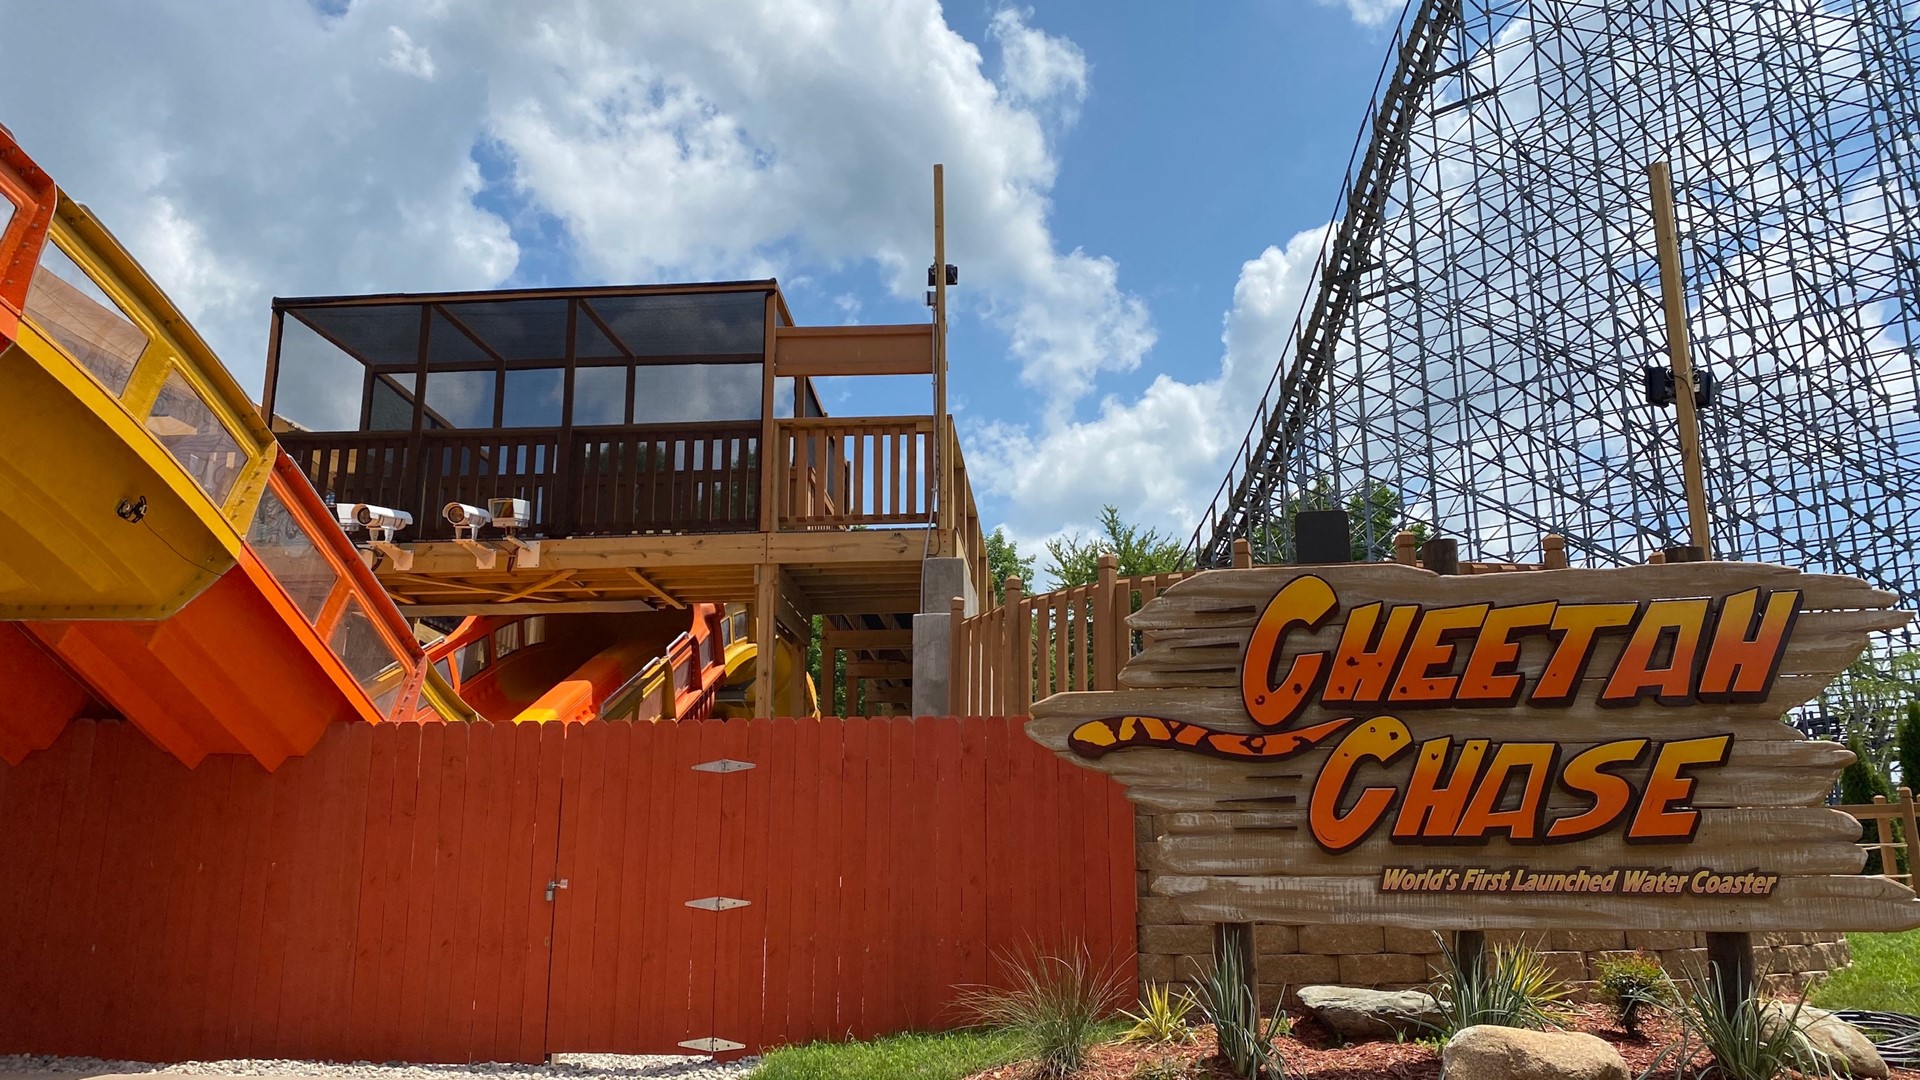 Cheetah Chase sends riders on a three-seat toboggan on a water-powered blast through more than 1,700 feet of track. Top speed is a quick 30 feet per second.